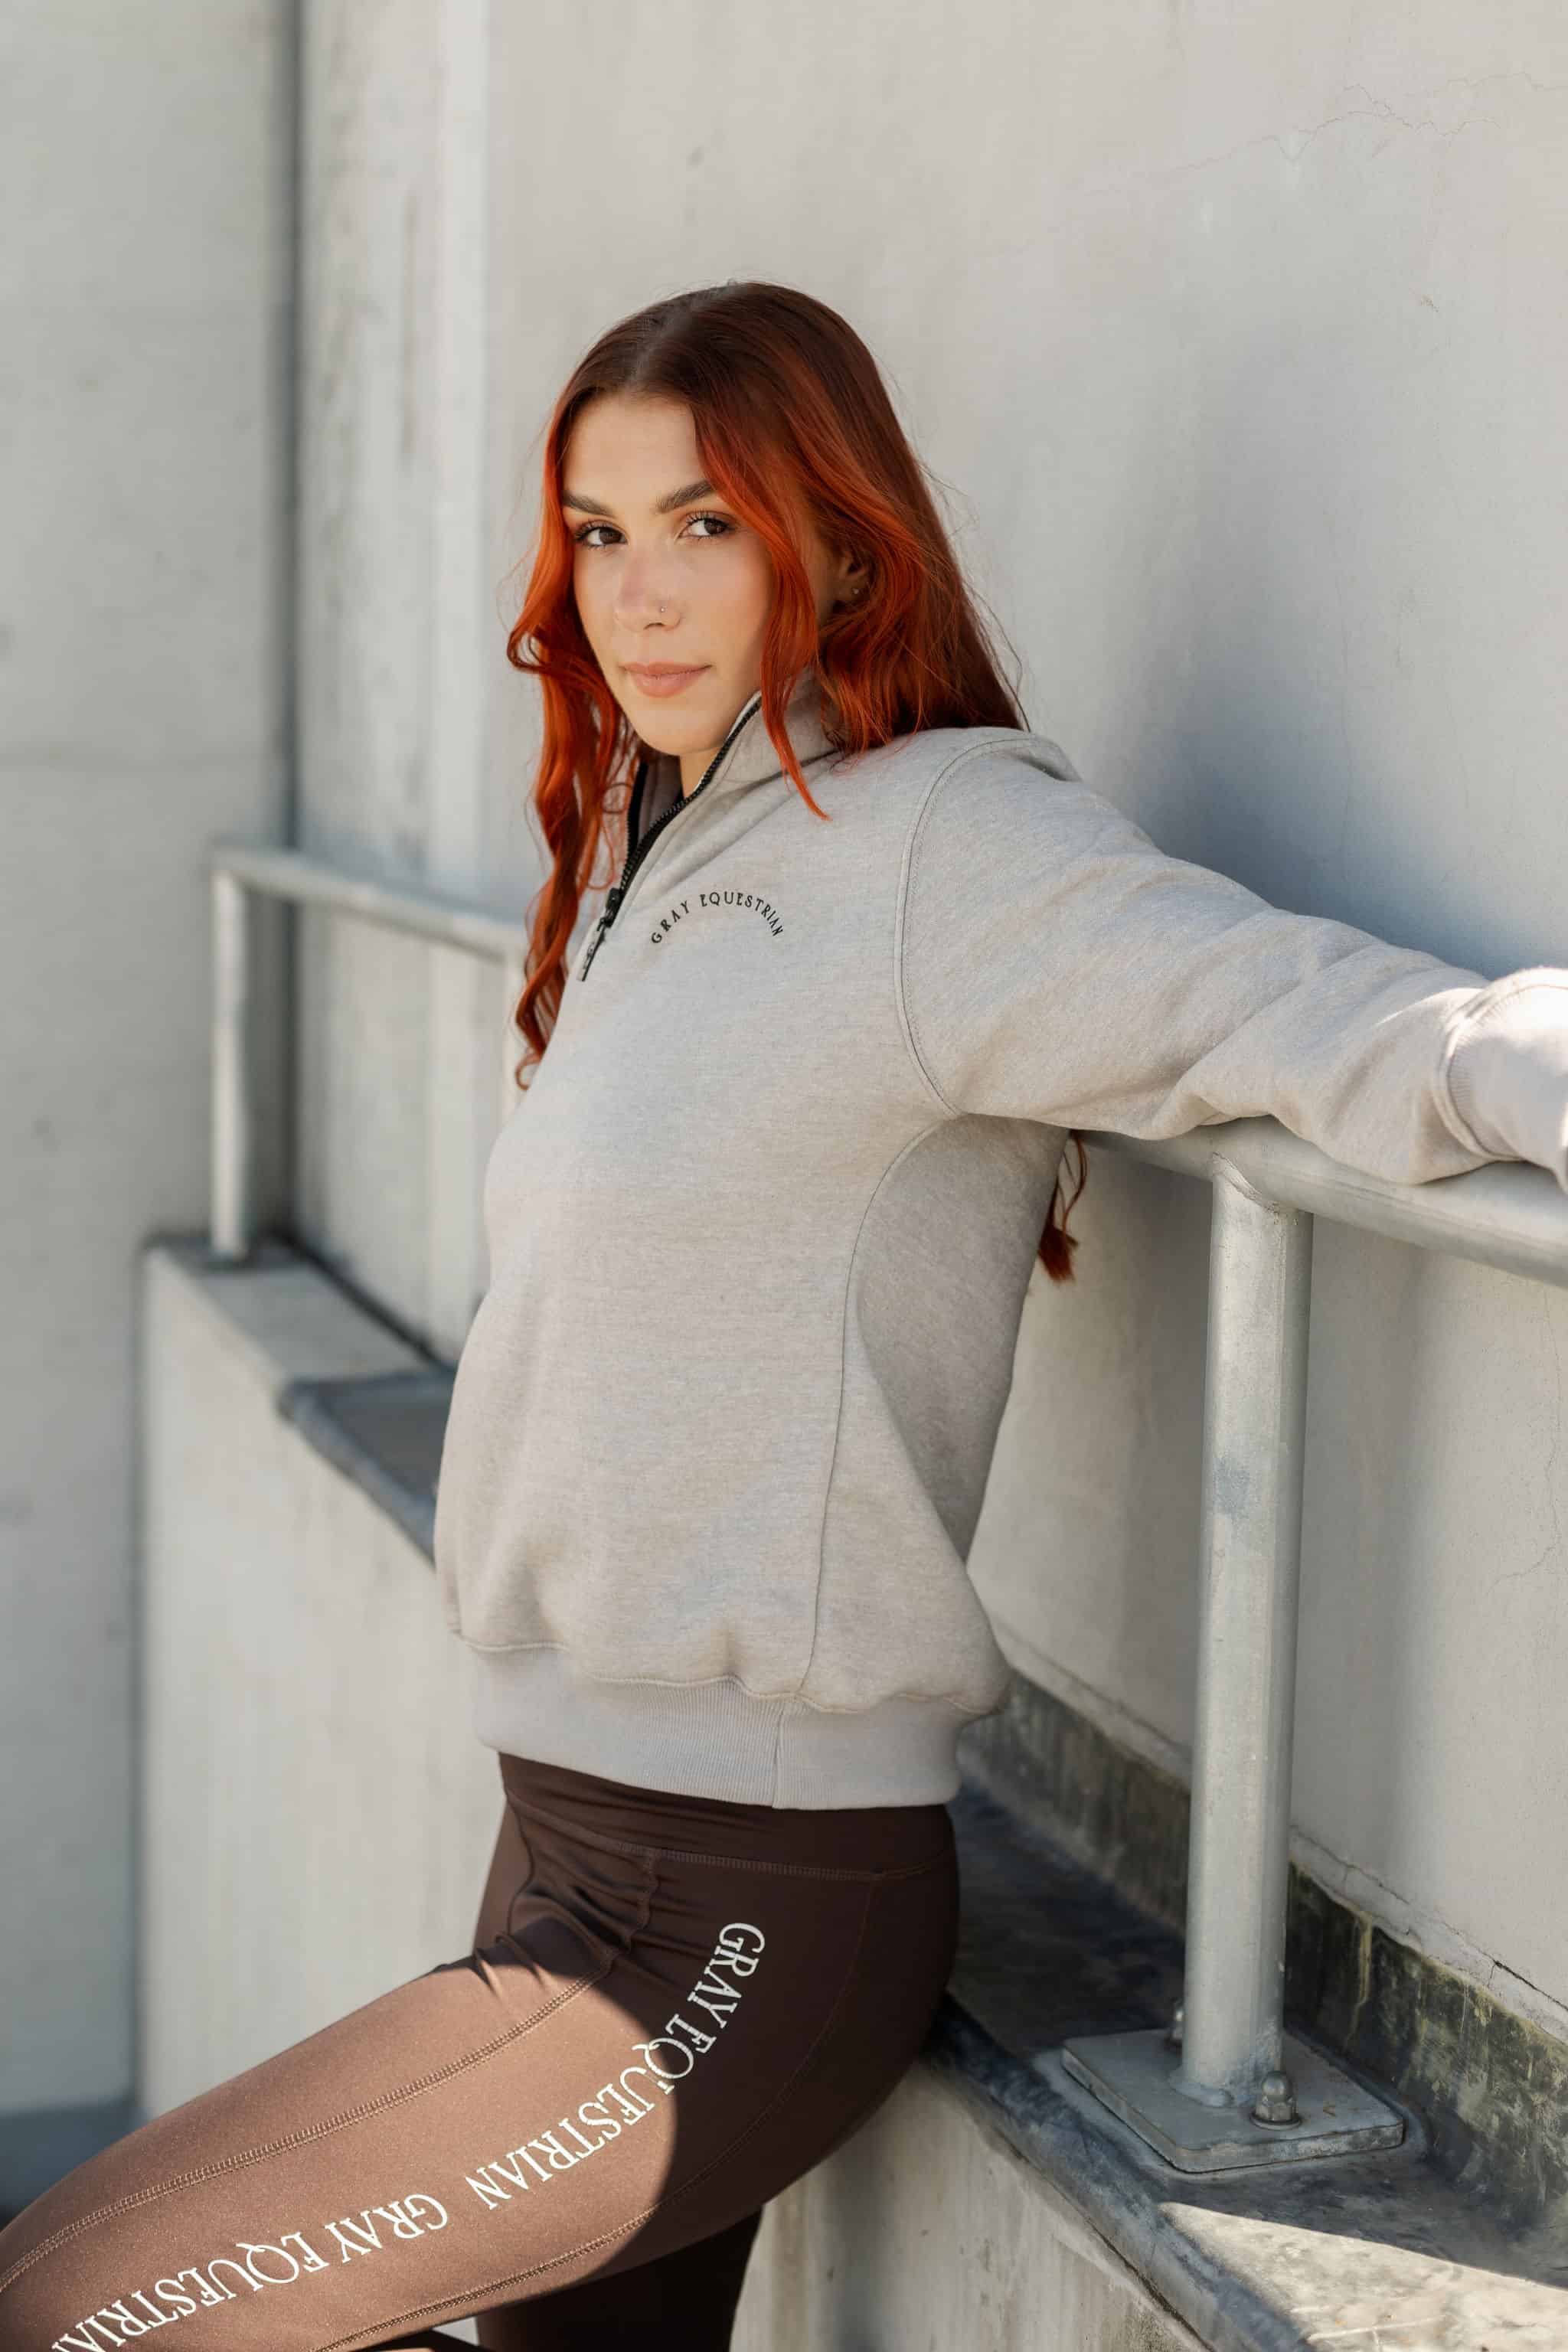 A model wearing our taupe grey 1/4 zip sweatshirt and green riding leggings.